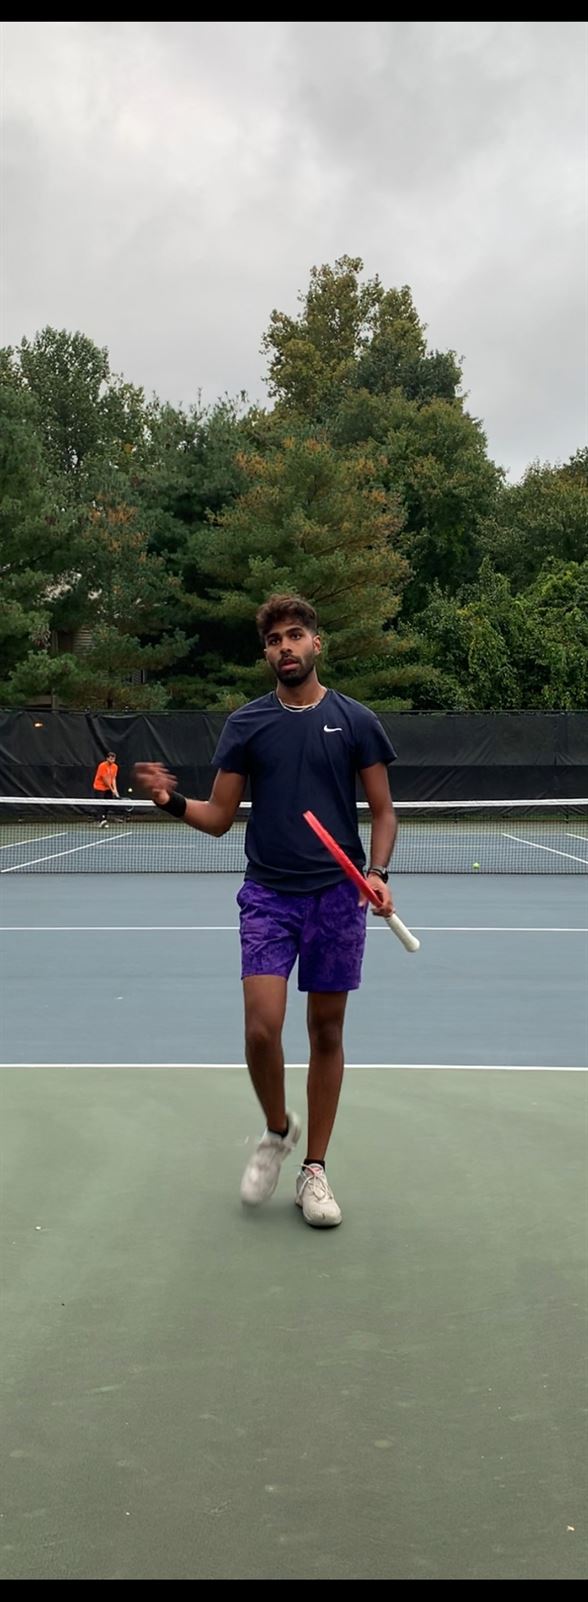 Romman Shoaib has been a standout performer for the club tennis team. Photo courtesy of Romman Shoaib